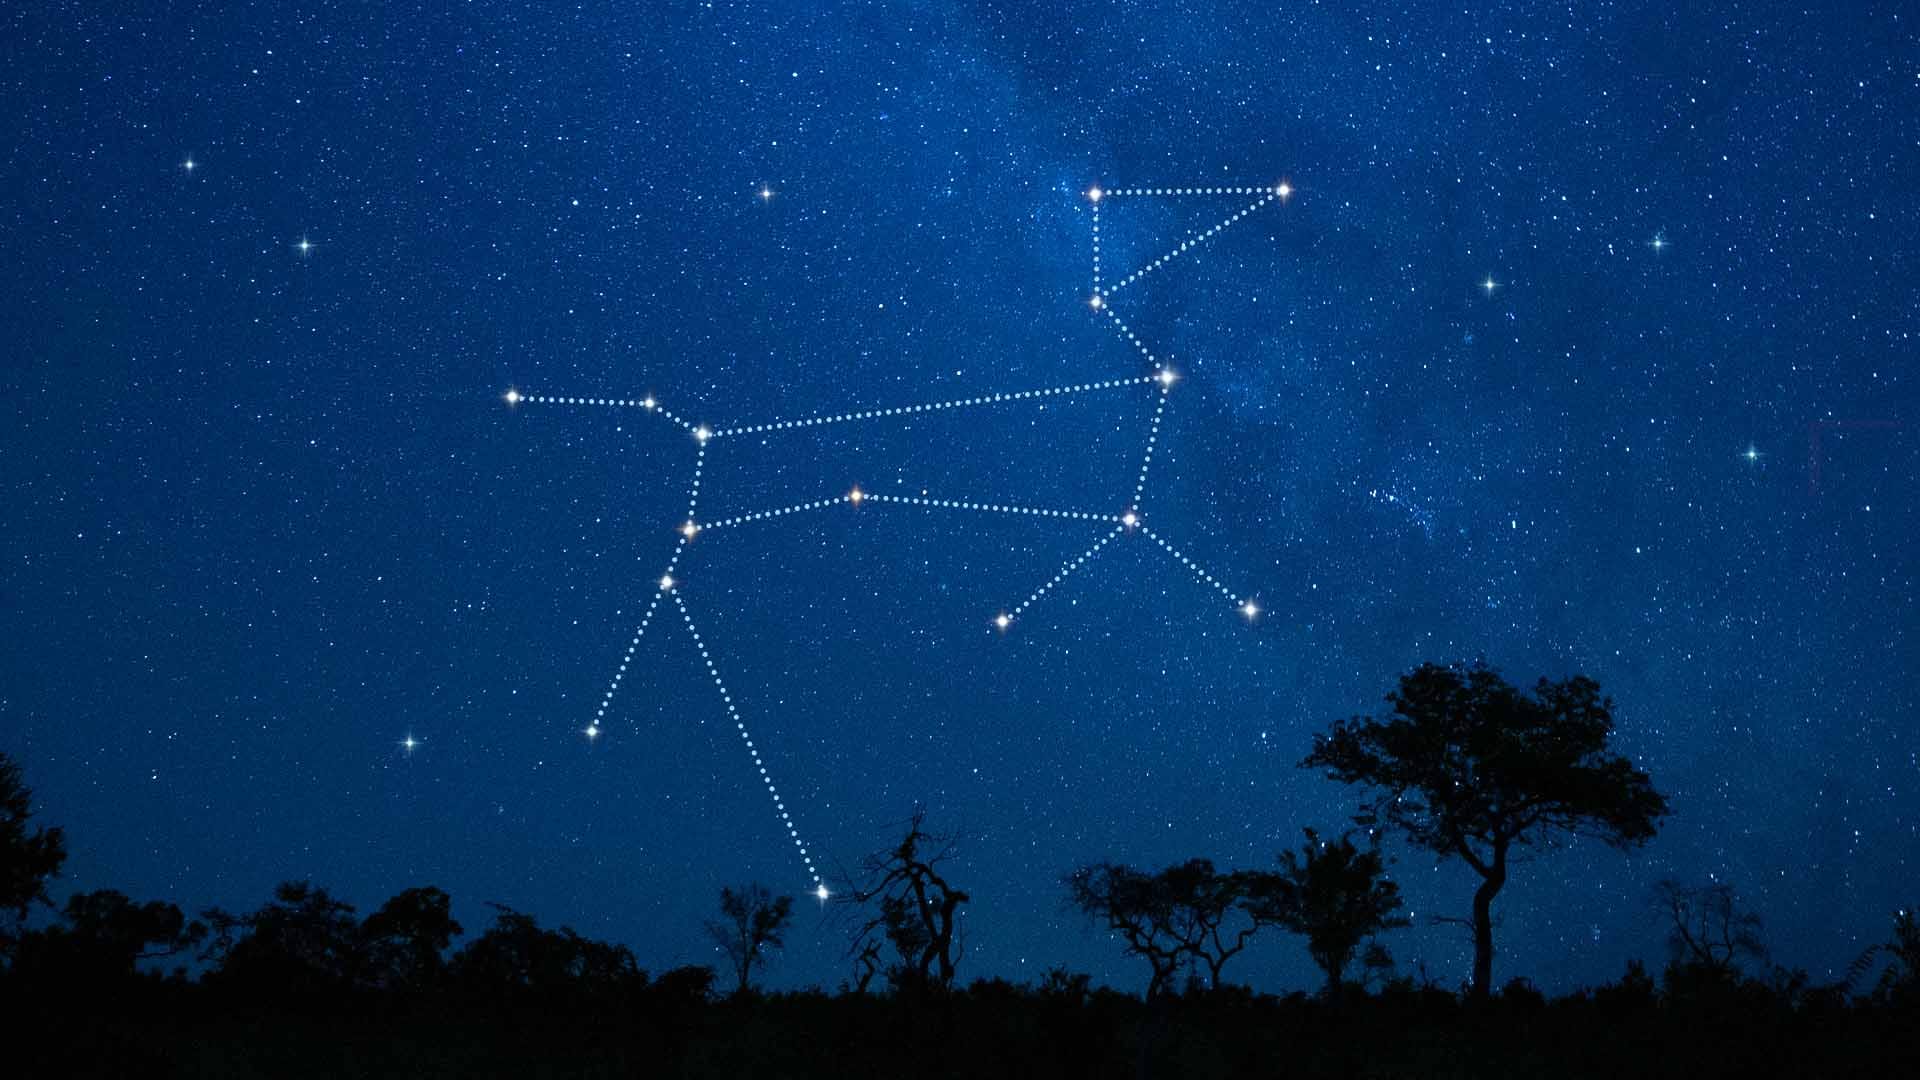 We’ve Gone to the Dogs! 🐕 Can You Ace This 20-Question Dog Quiz? Canis Major constellation stars